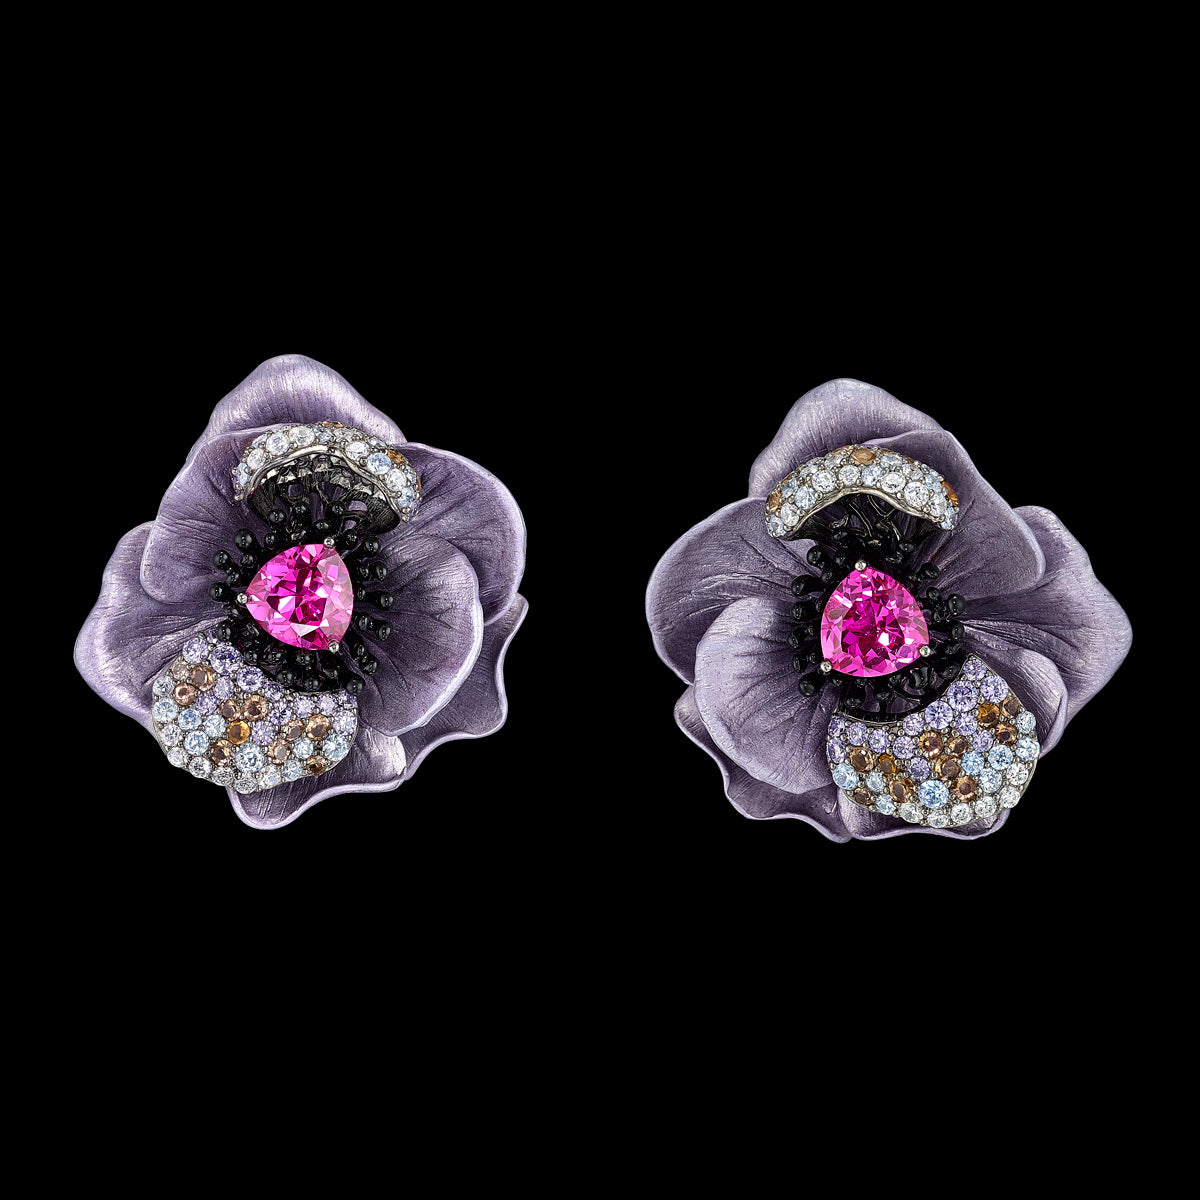 Lavender Bloom Earrings, Earrings, Anabela Chan Joaillerie - Fine jewelry with laboratory grown and created gemstones hand-crafted in the United Kingdom. Anabela Chan Joaillerie is the first fine jewellery brand in the world to champion laboratory-grown and created gemstones with high jewellery design, artisanal craftsmanship and a focus on ethical and sustainable innovations.